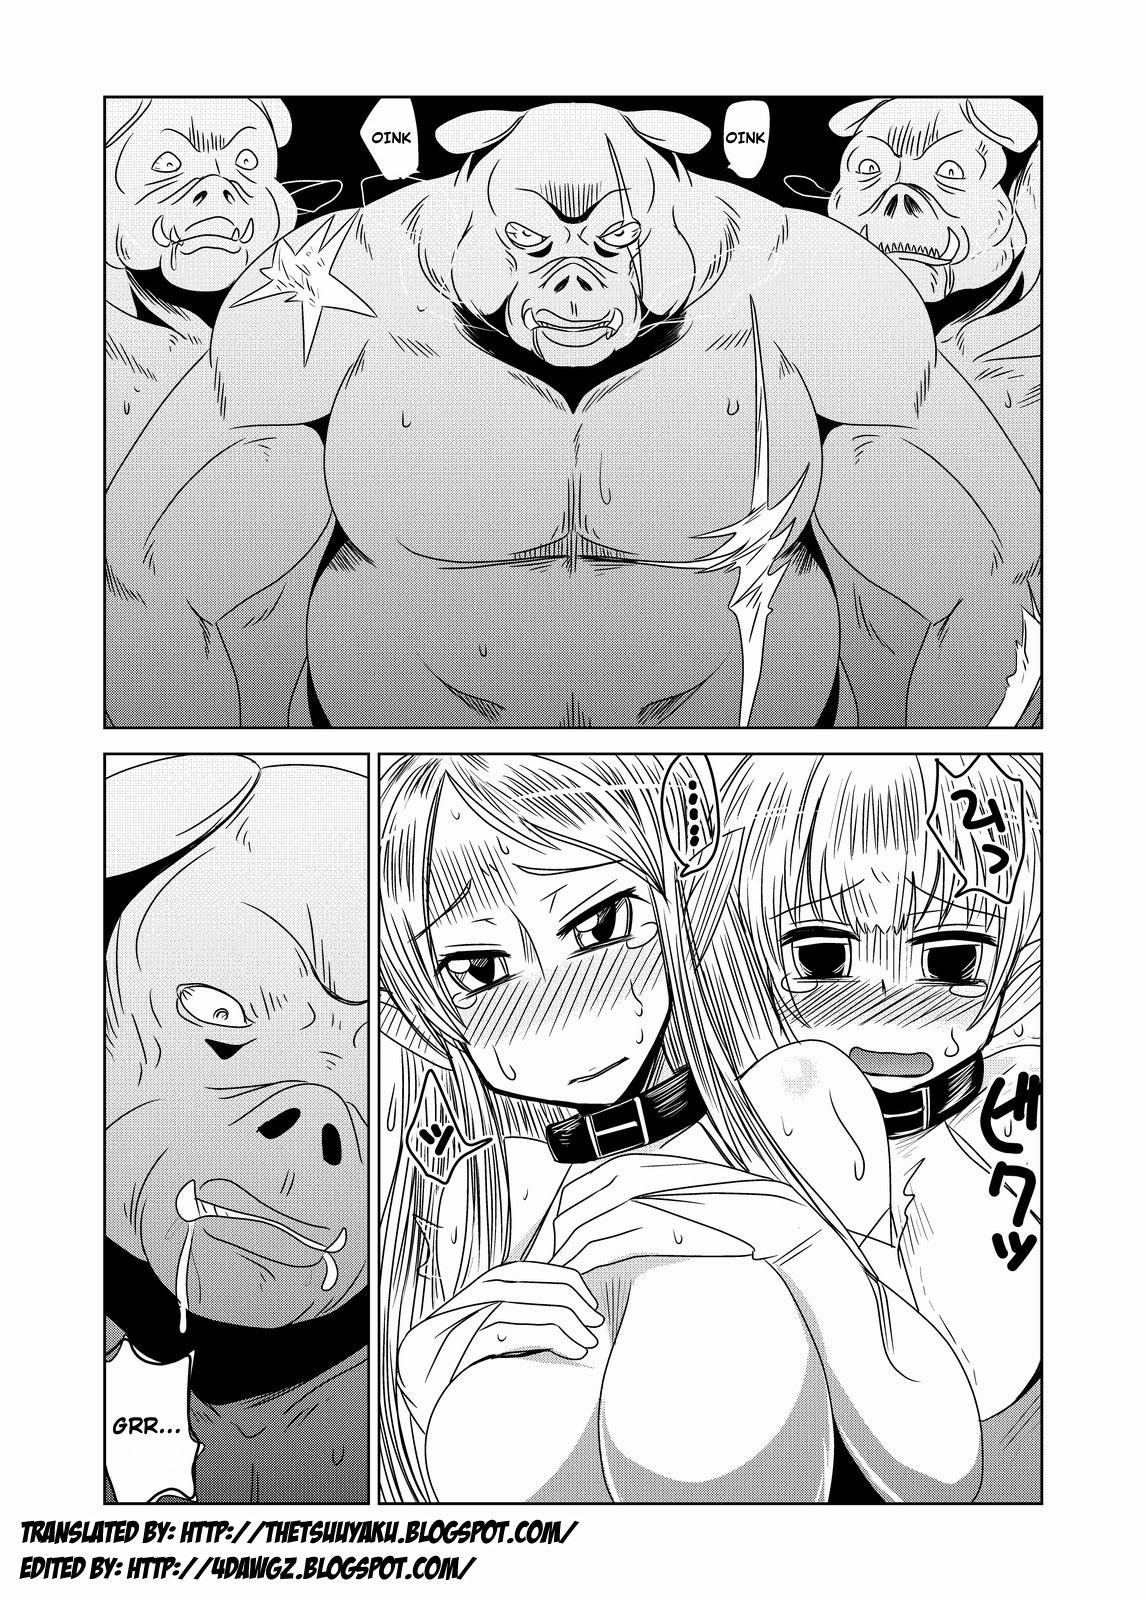 Roludo Orc Dakara Elf Osotta Zenin Succubus Datta wa. | We Assaulted Some Elves Because We're Orcs But It Turns Out They Were All Actually Succubi Pussyfucking - Page 2